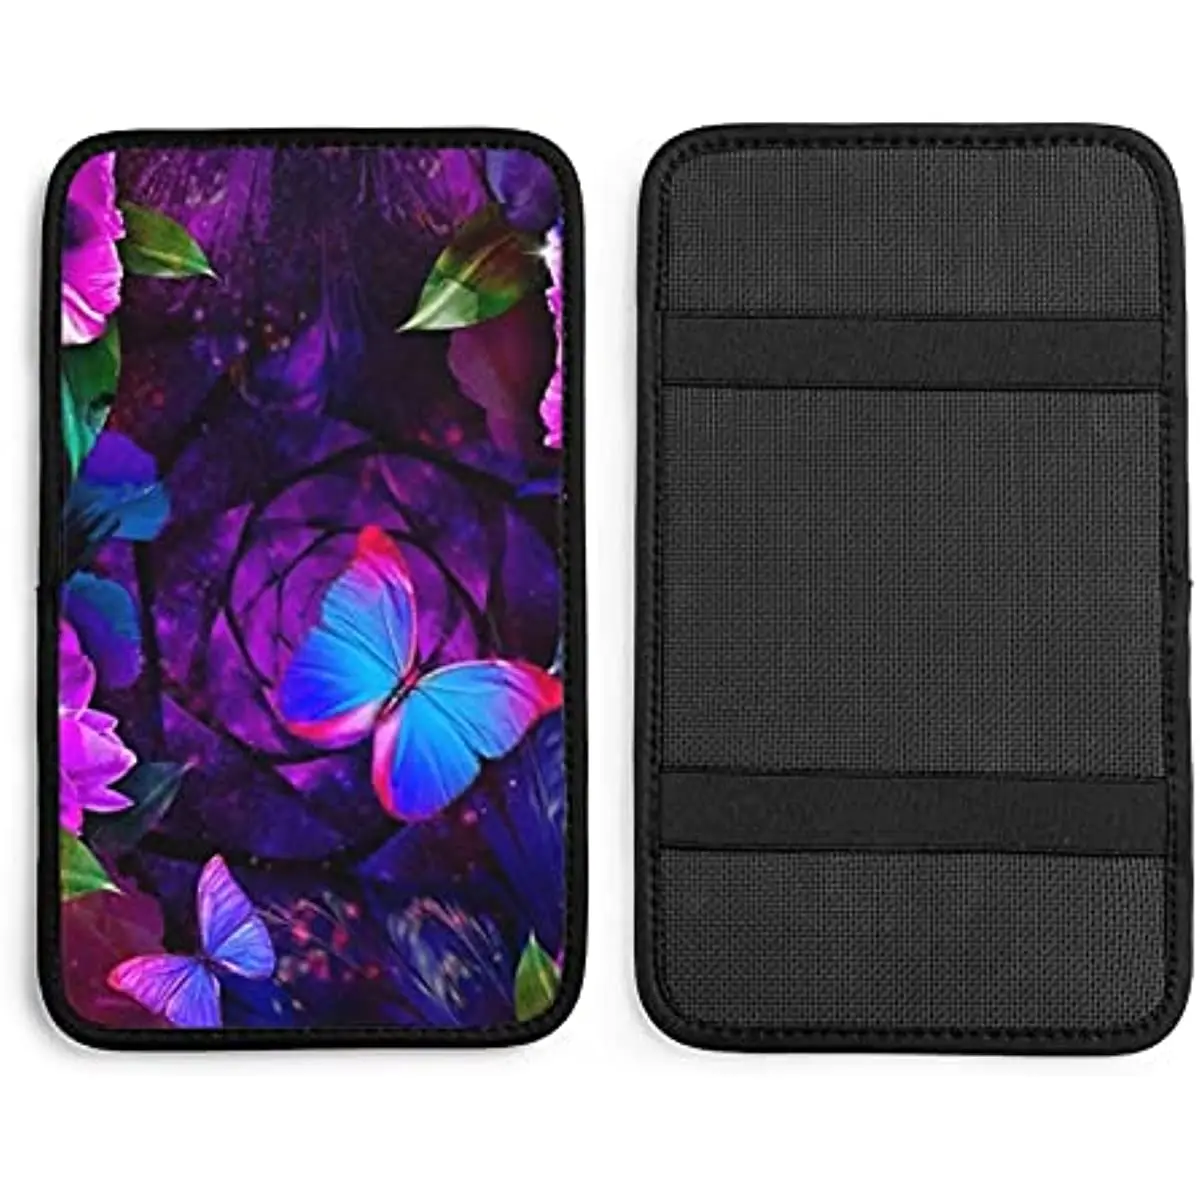 

Dark Rose Butterflies Car Armrest Cover for Women Men Auto Center Console Cushion Pad Universal Fit Seat Box Cover Protec